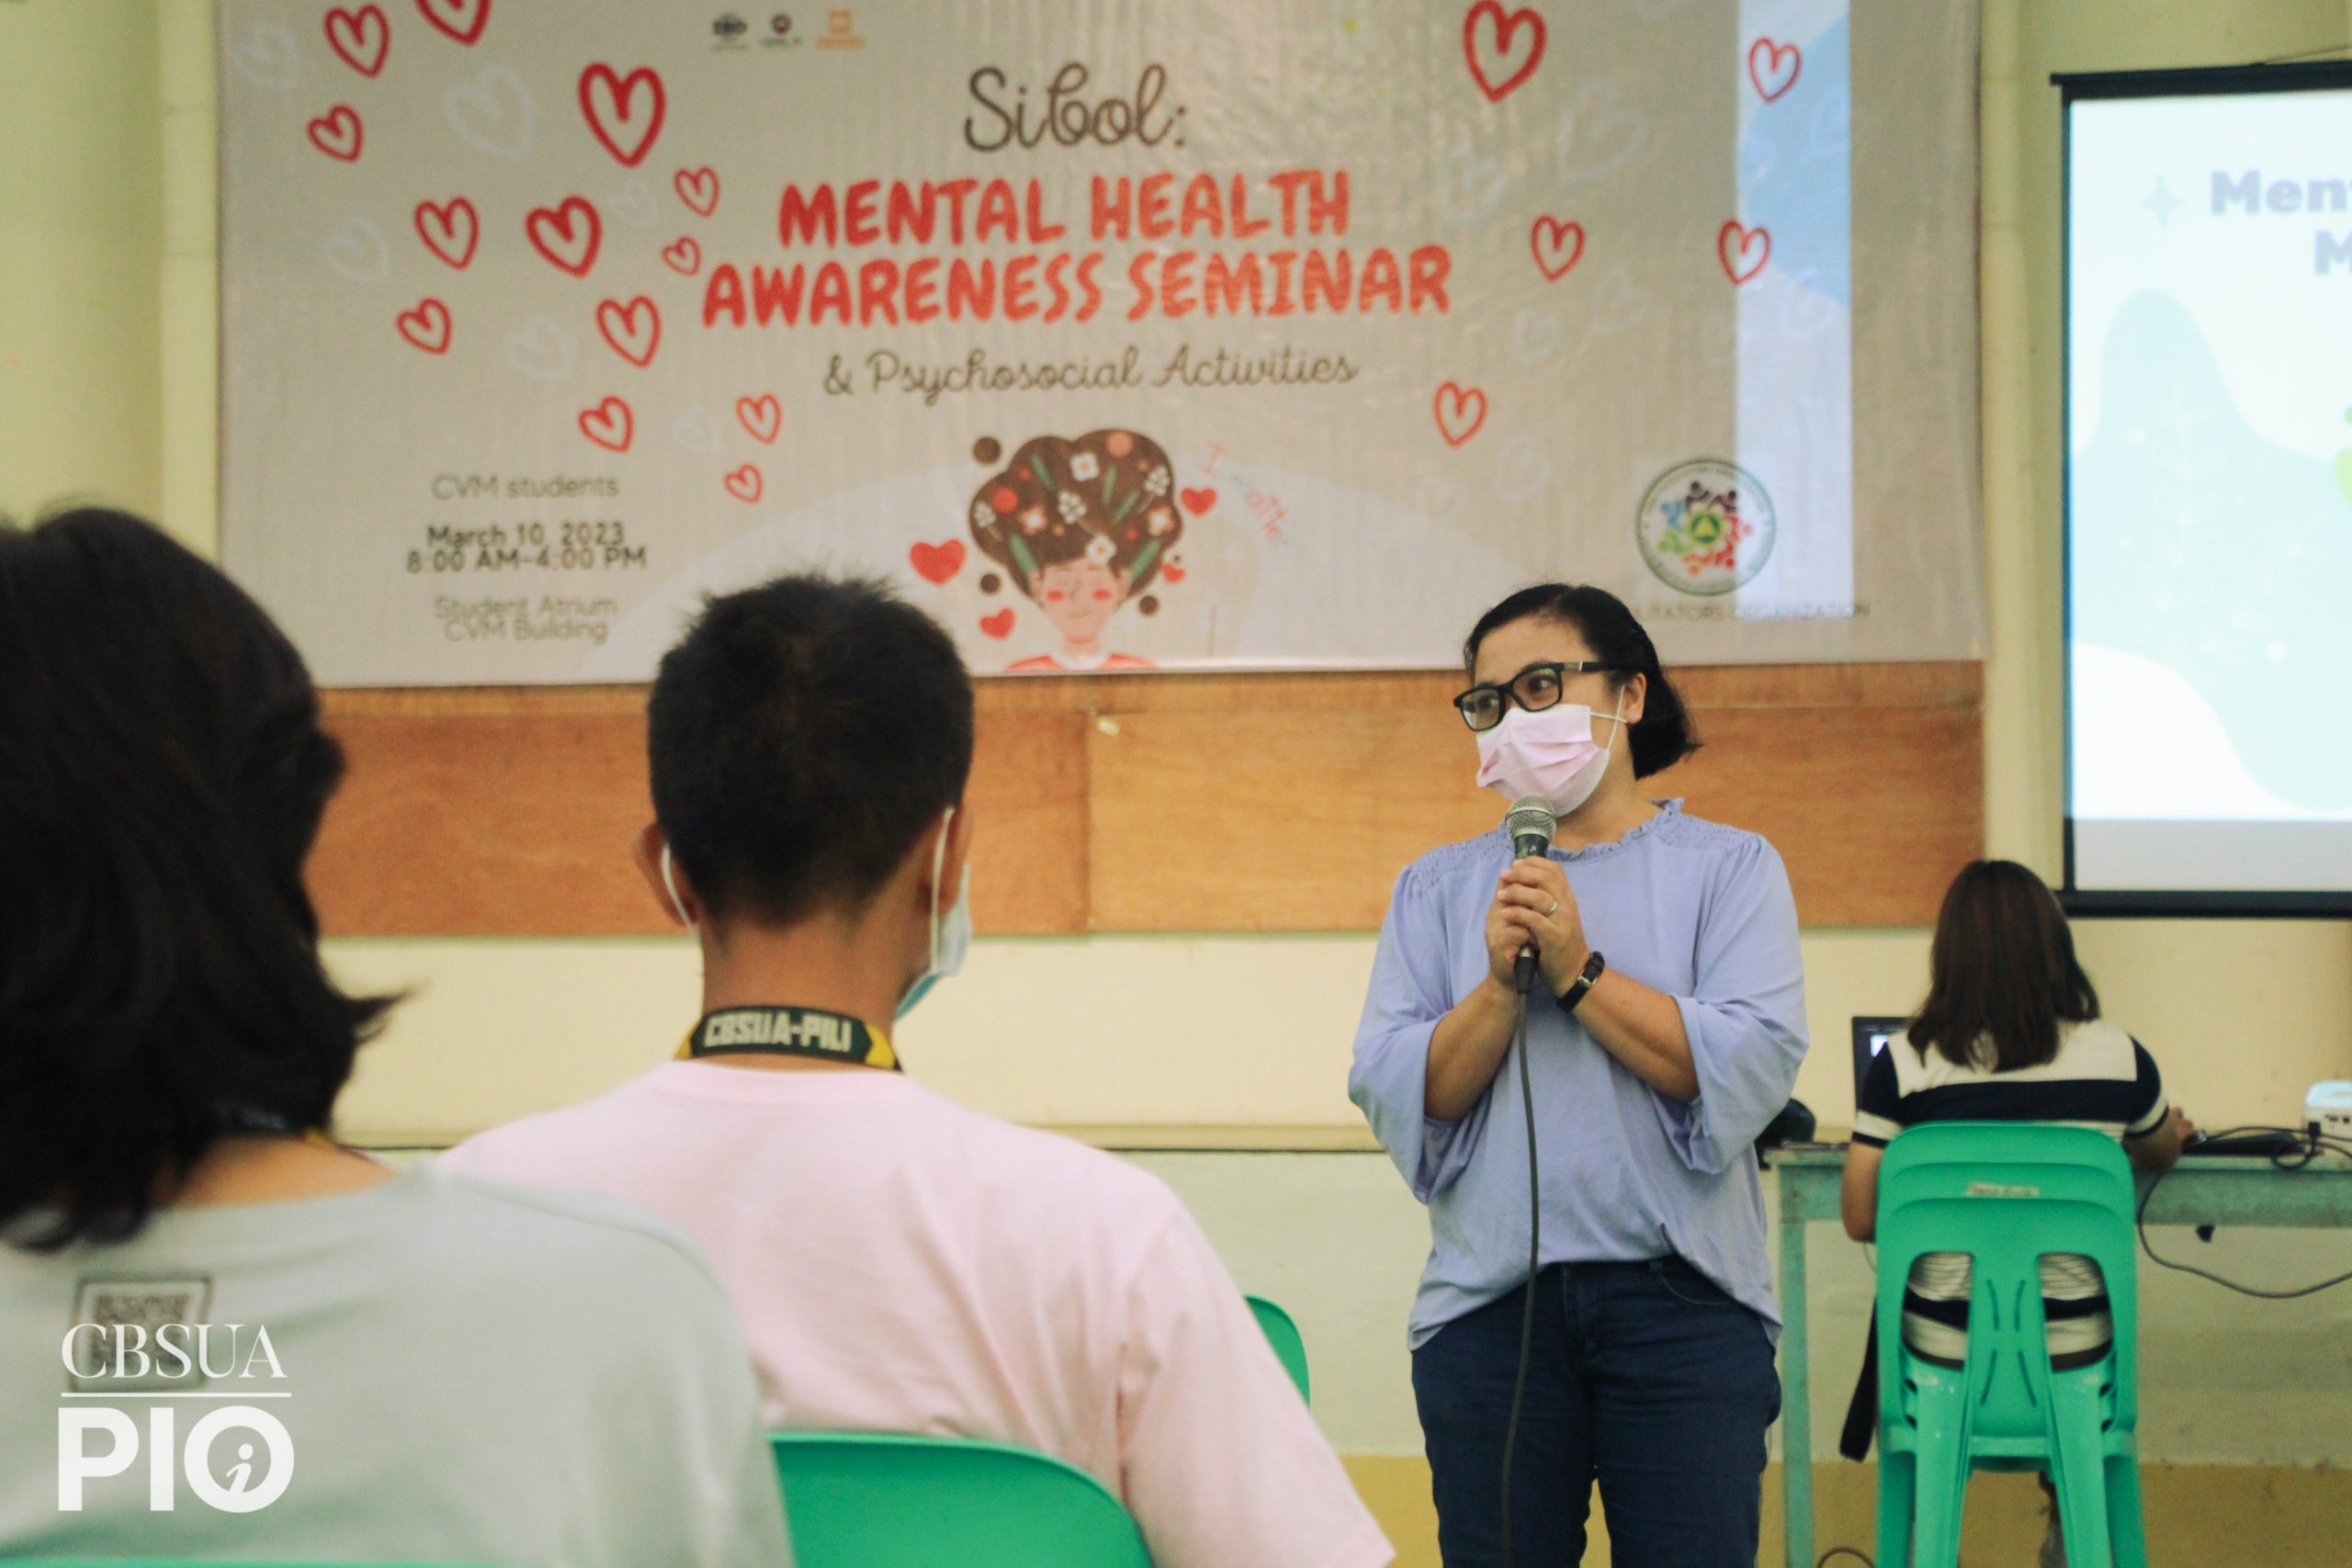 OSAS GUIDANCE AND COUNSELING UNIT PROMOTES MENTAL HEALTH TO CVM STUDENTS